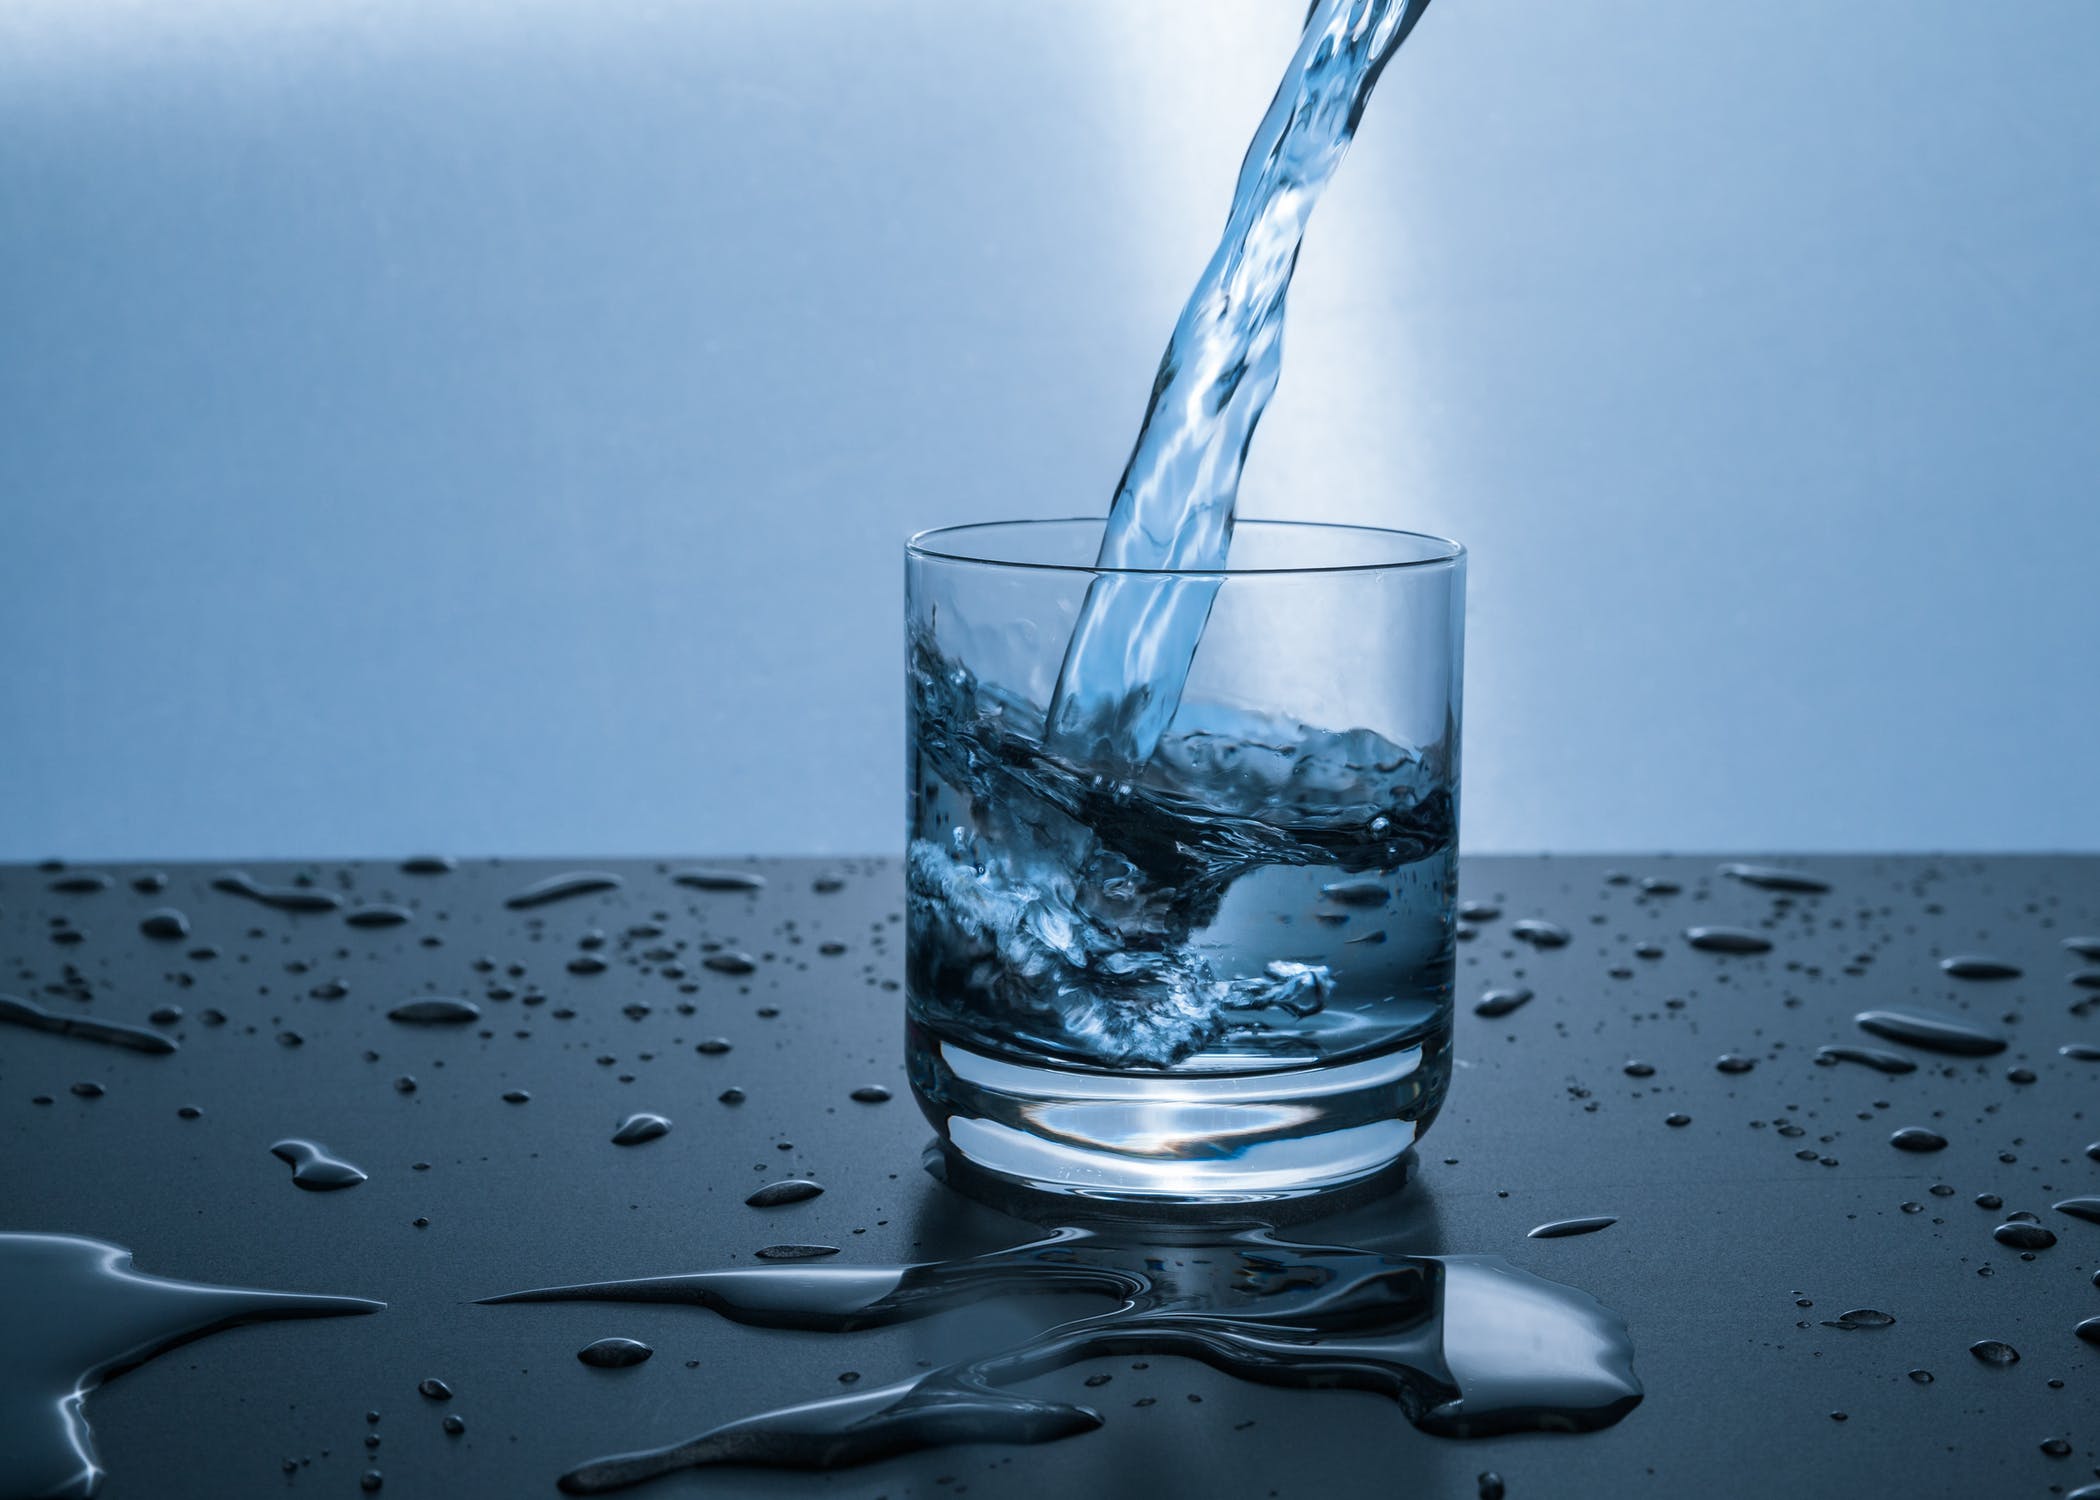 Home Water Filtration Here’s Why You Should Pay Attention to What’s in Your Tap Water